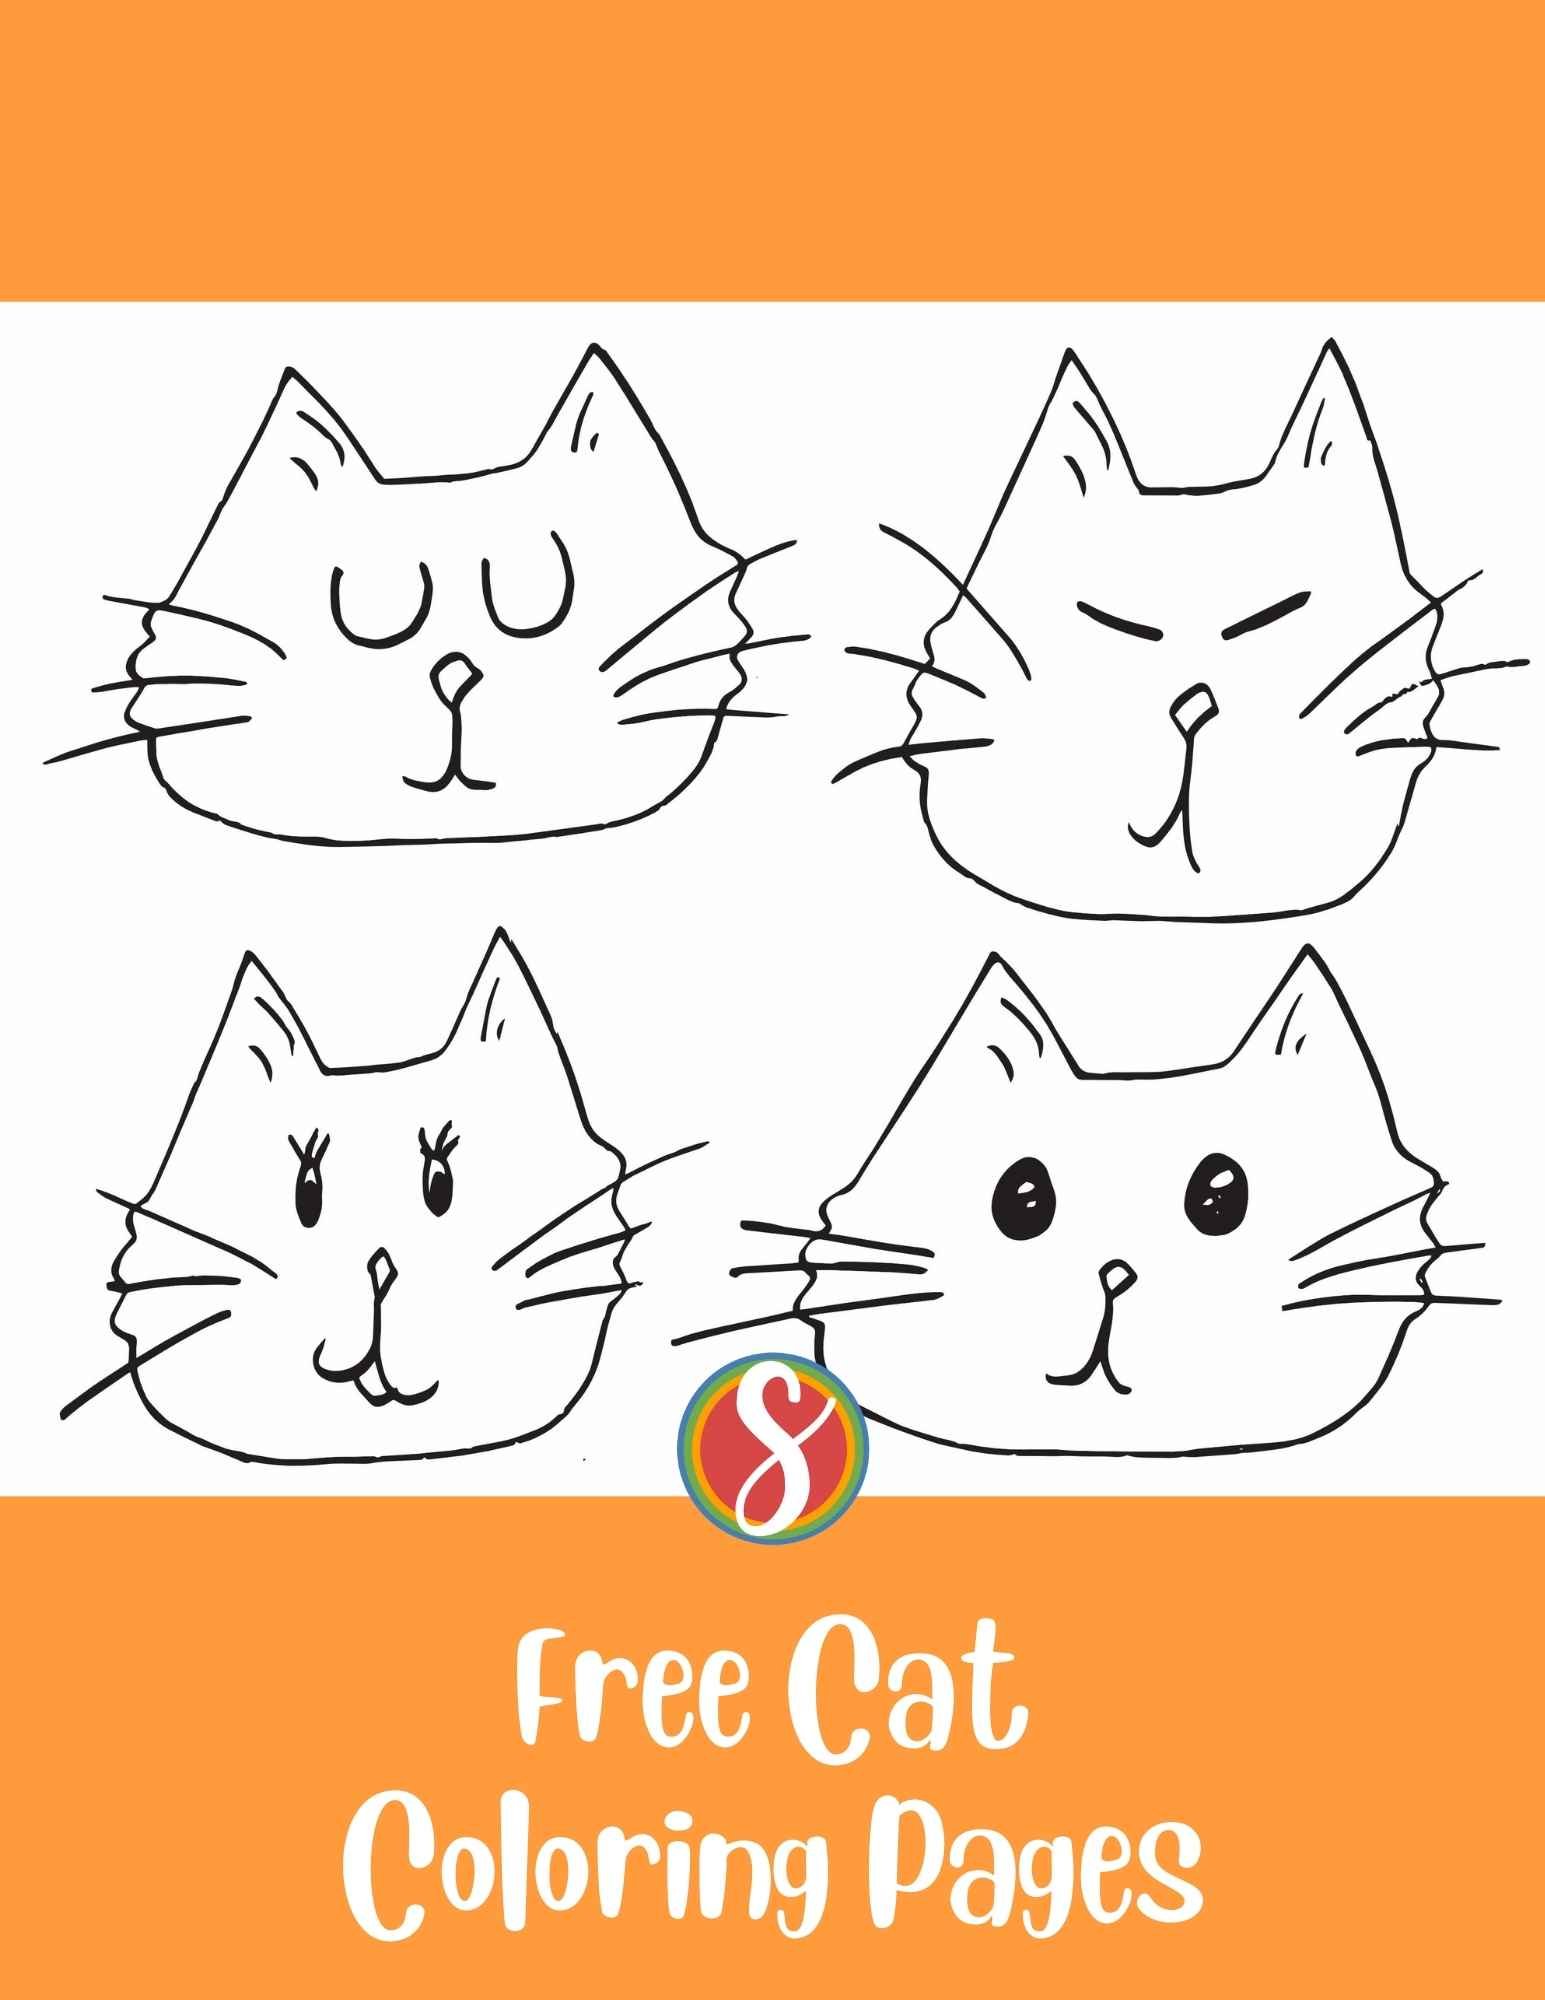 4 simple faces of cats coloring page